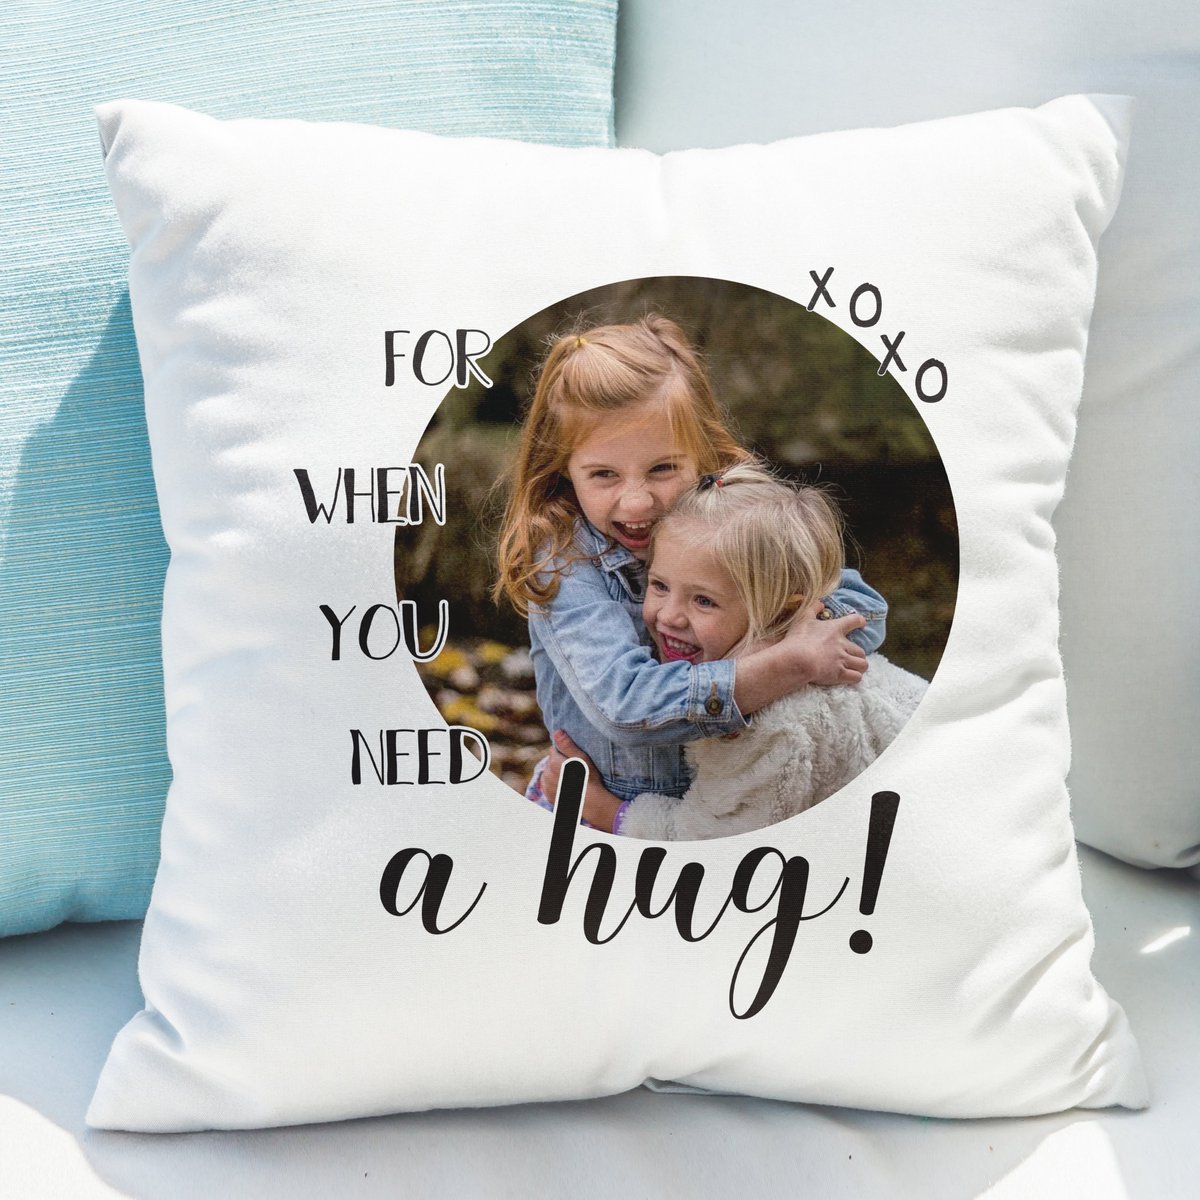 They will never be too far away from a hug with this adorable cushion. Personalised with your own favourite photo lilybluestore.com/products/perso…

#giftideas #fatherday #photogifts #shopindie #mhhsbd